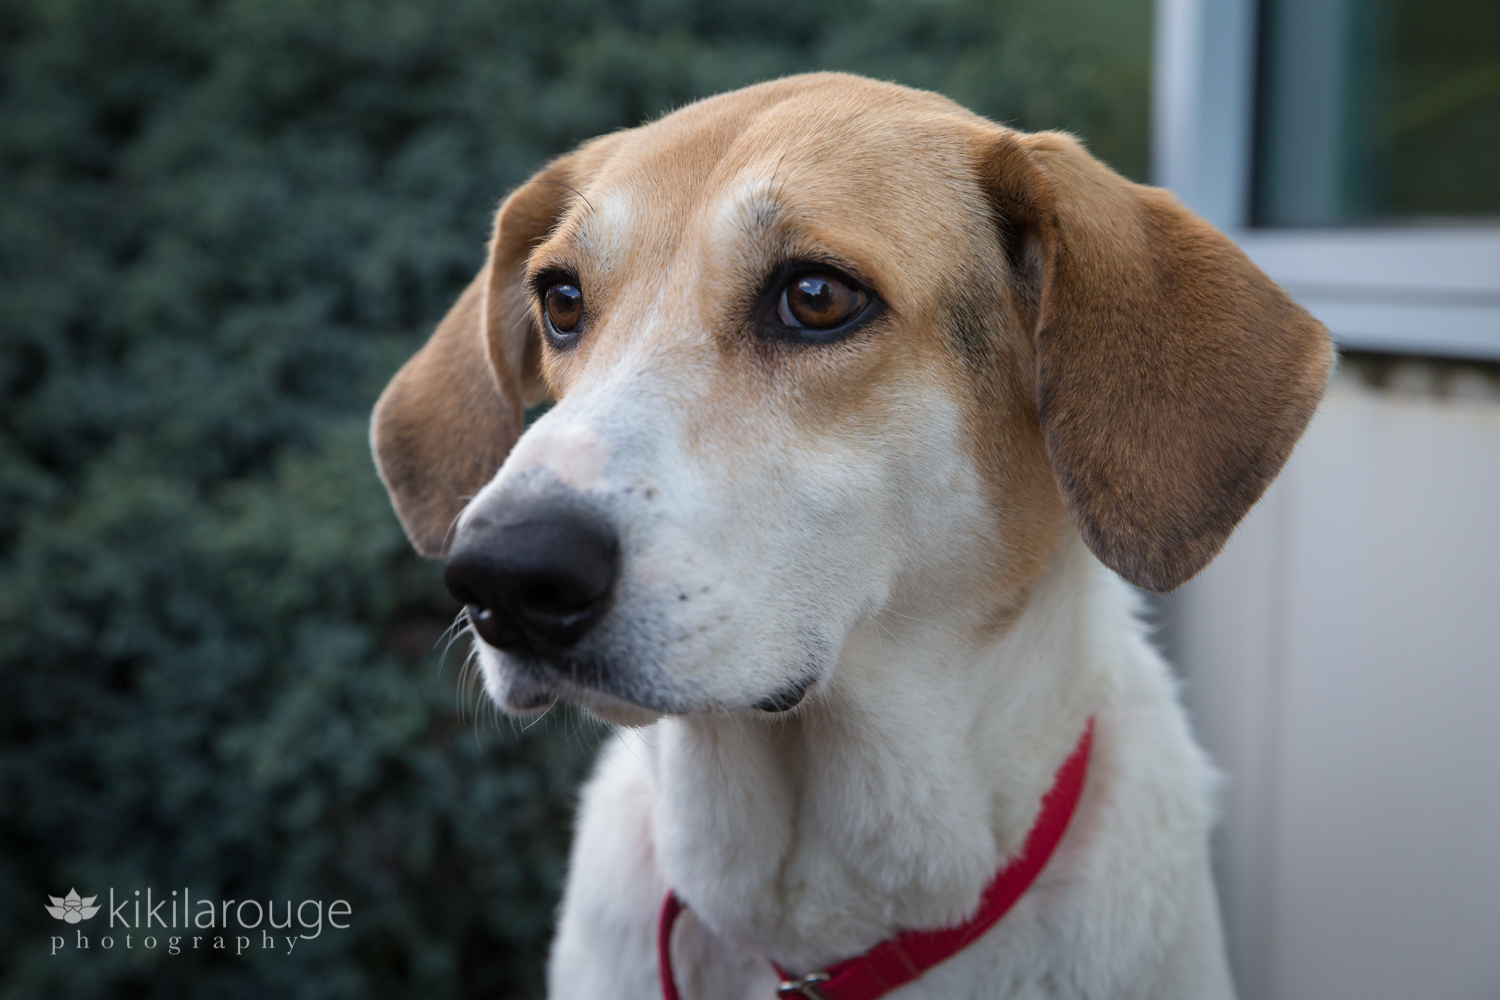 White coonhound rescue dog with tan ears